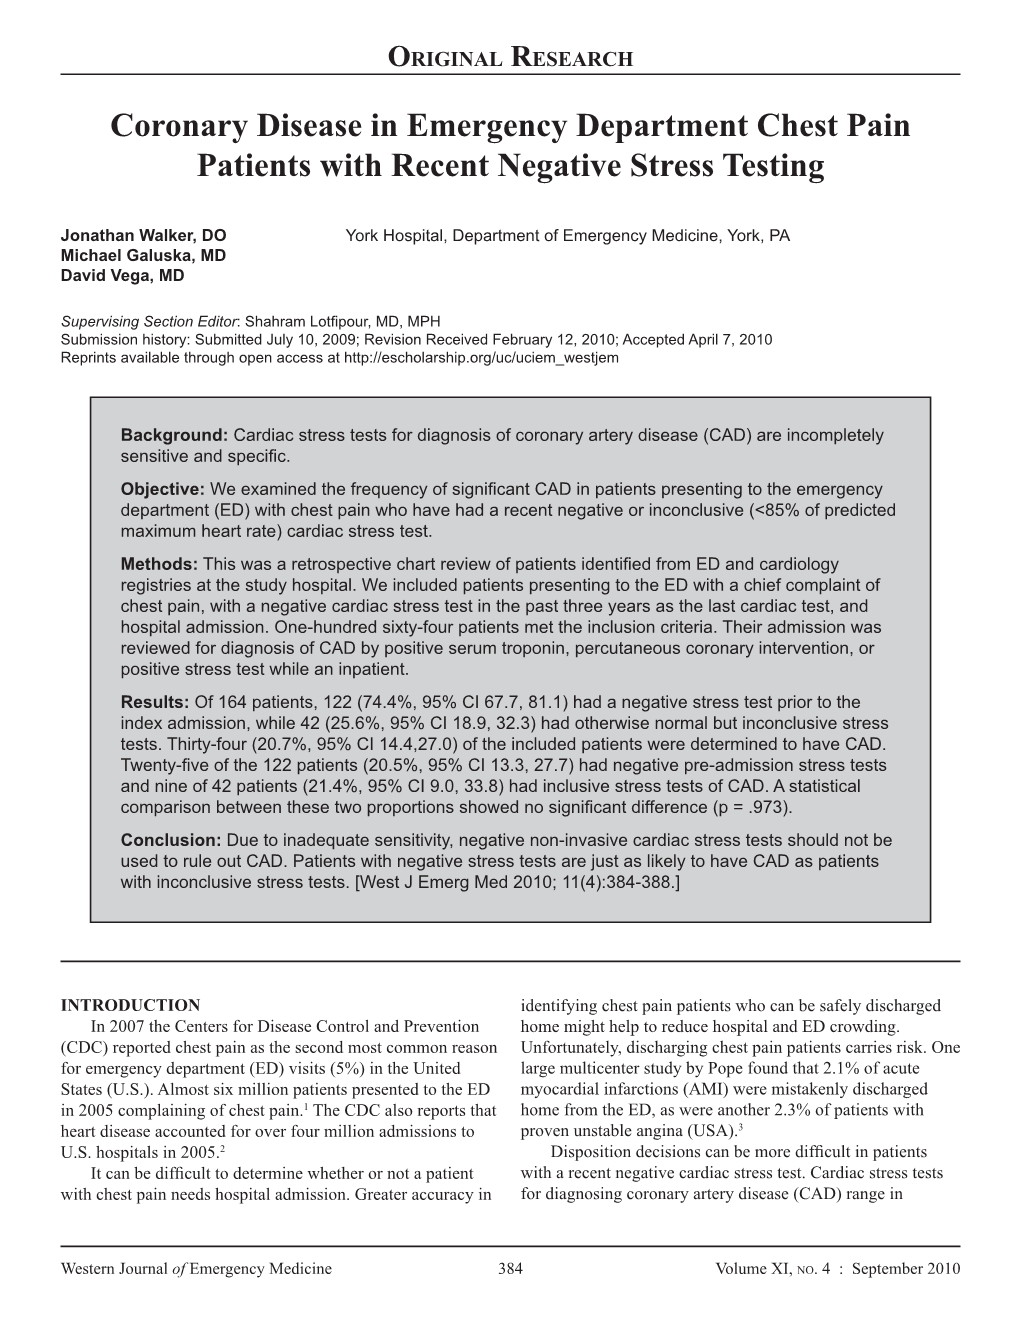 Coronary Disease in Emergency Department Chest Pain Patients with Recent Negative Stress Testing